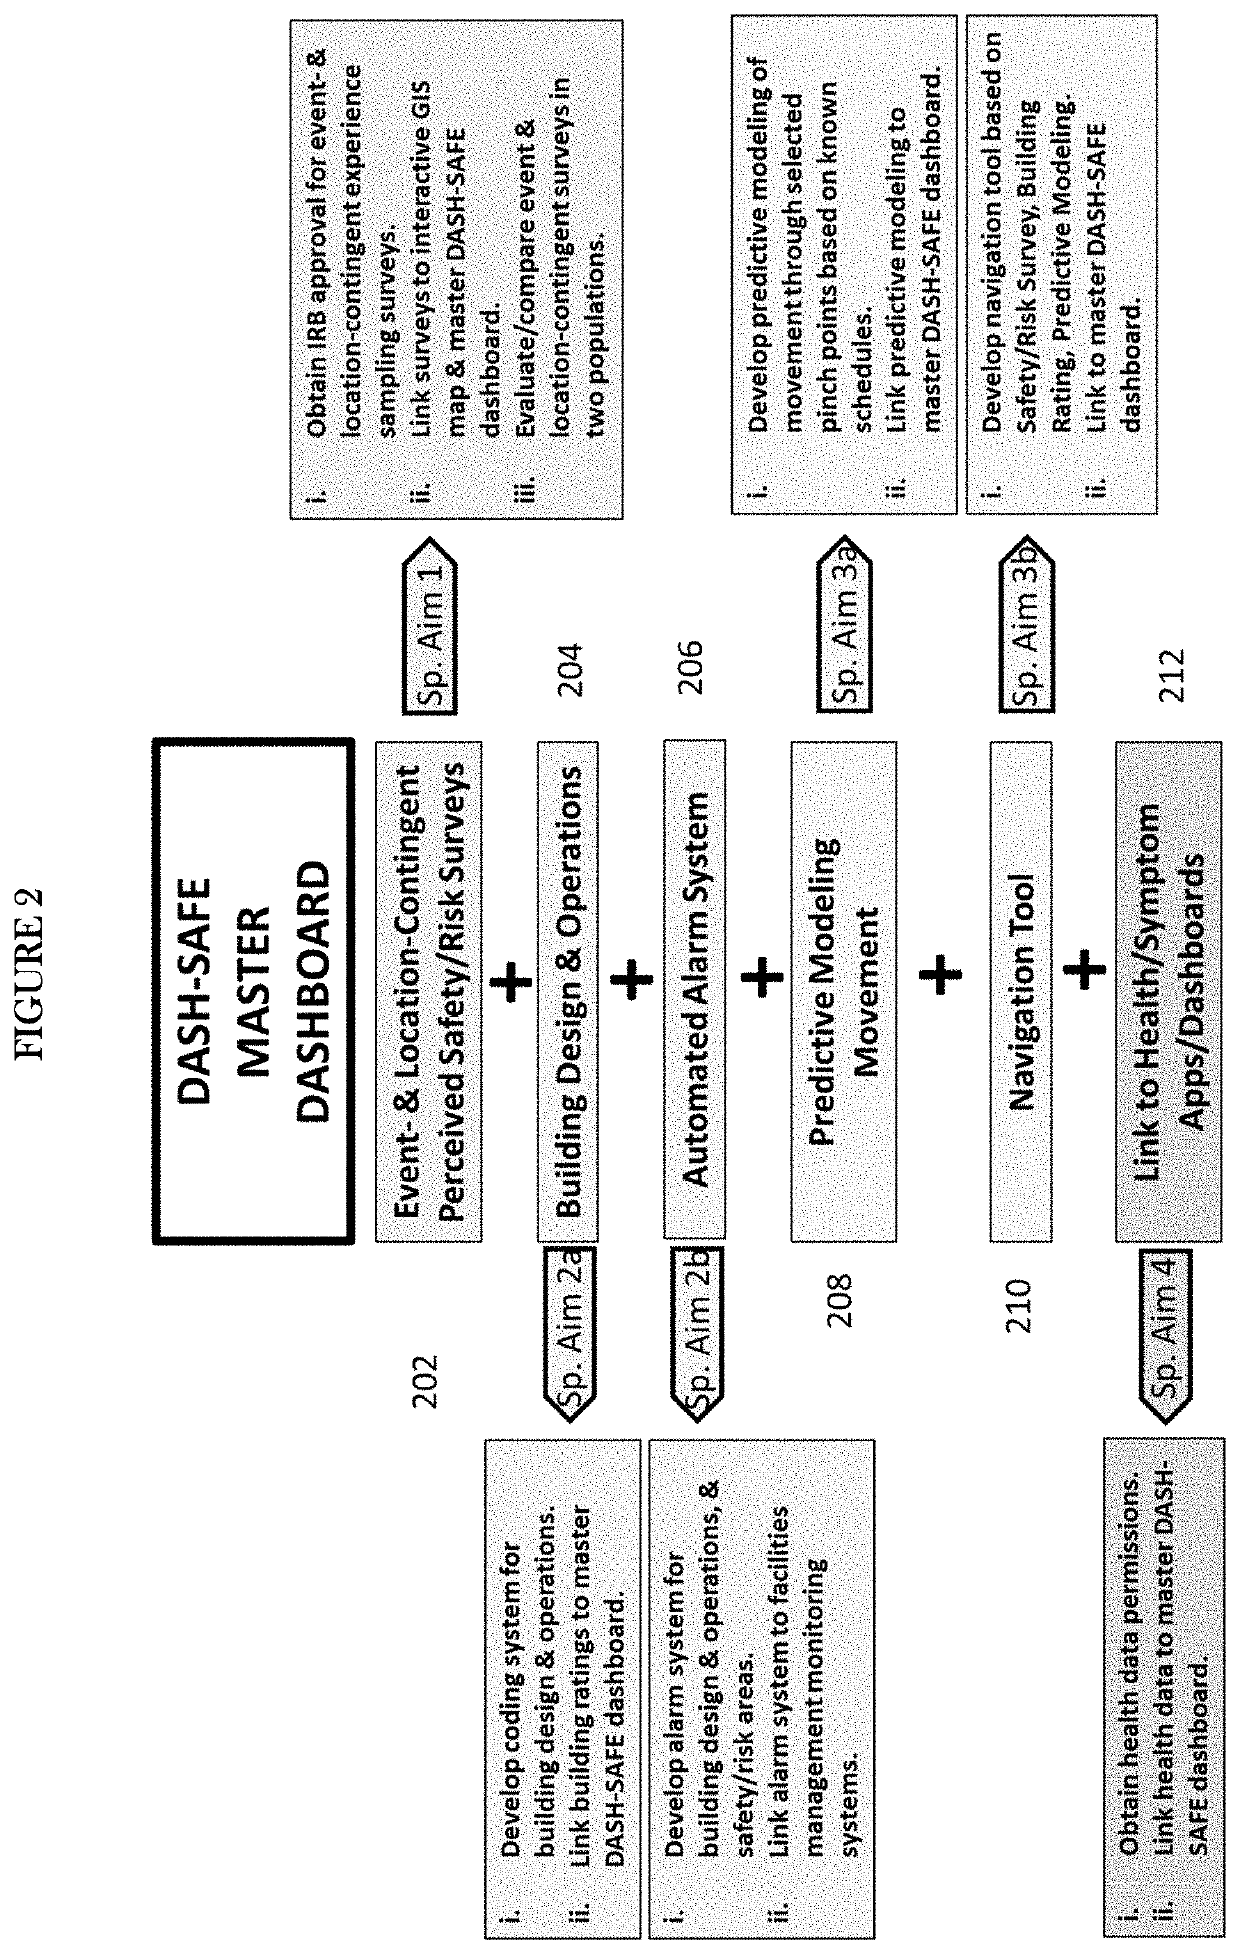 Systems and methods for a multi-modal geographic information system (GIS) dashboard for real-time mapping of perceived stress, health and safety behaviors, facilities design and operations, and movement